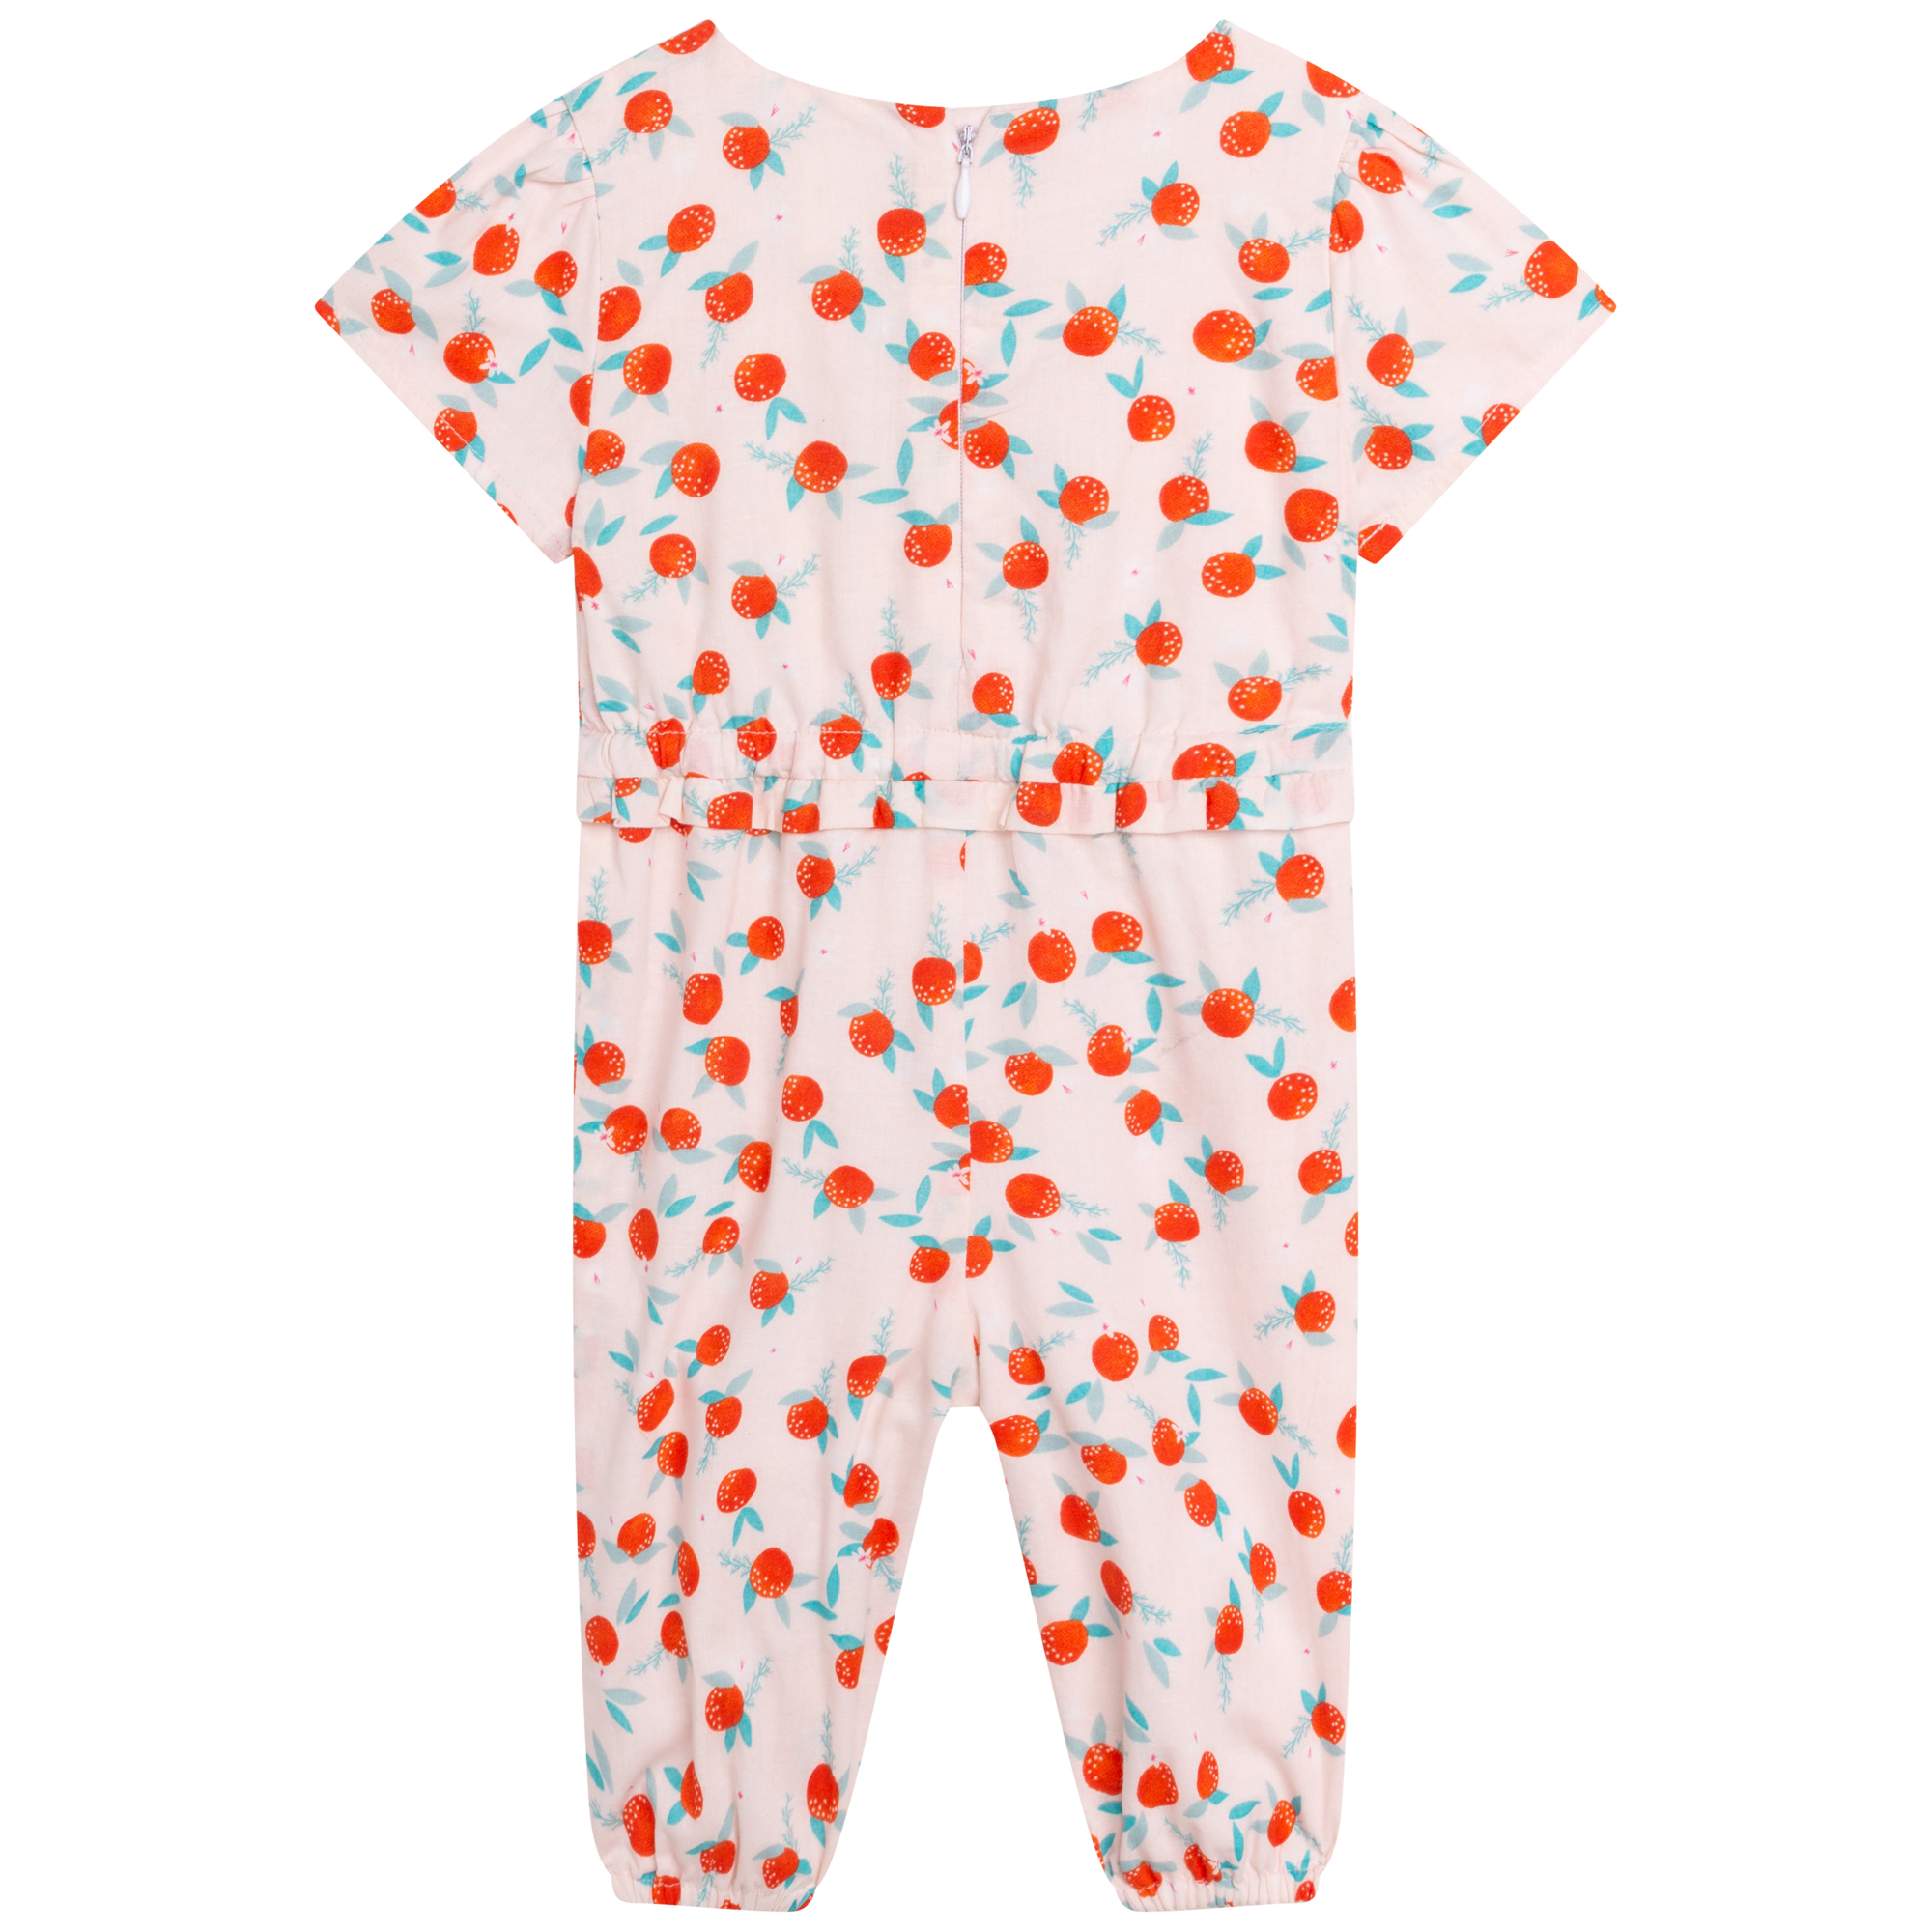 Printed cotton romper CARREMENT BEAU for GIRL